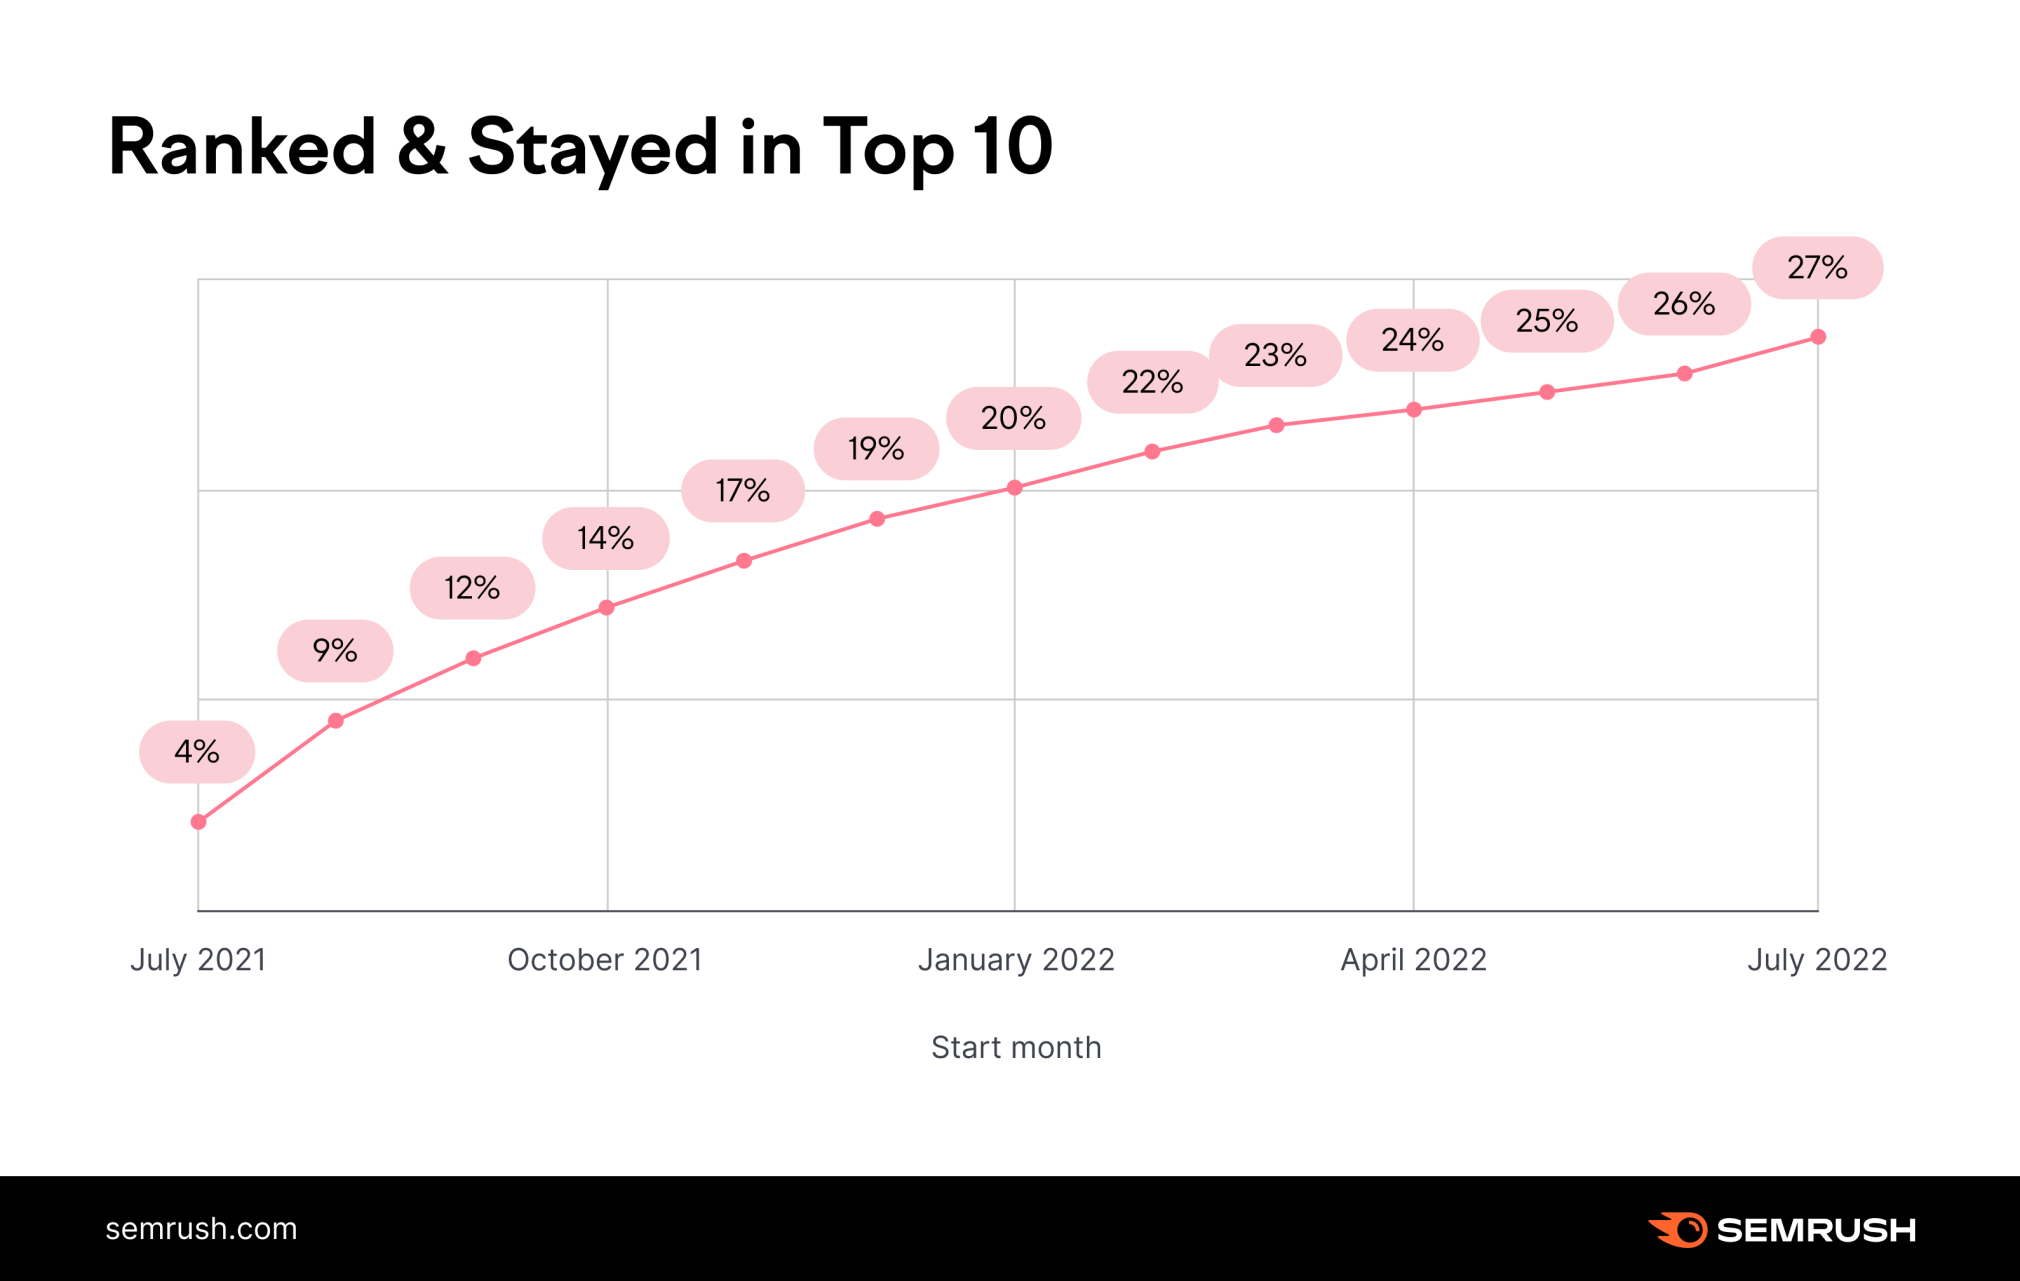 This chart from a Semrush study shows the number of domains that remained in the top 10 positions over the course of a year.